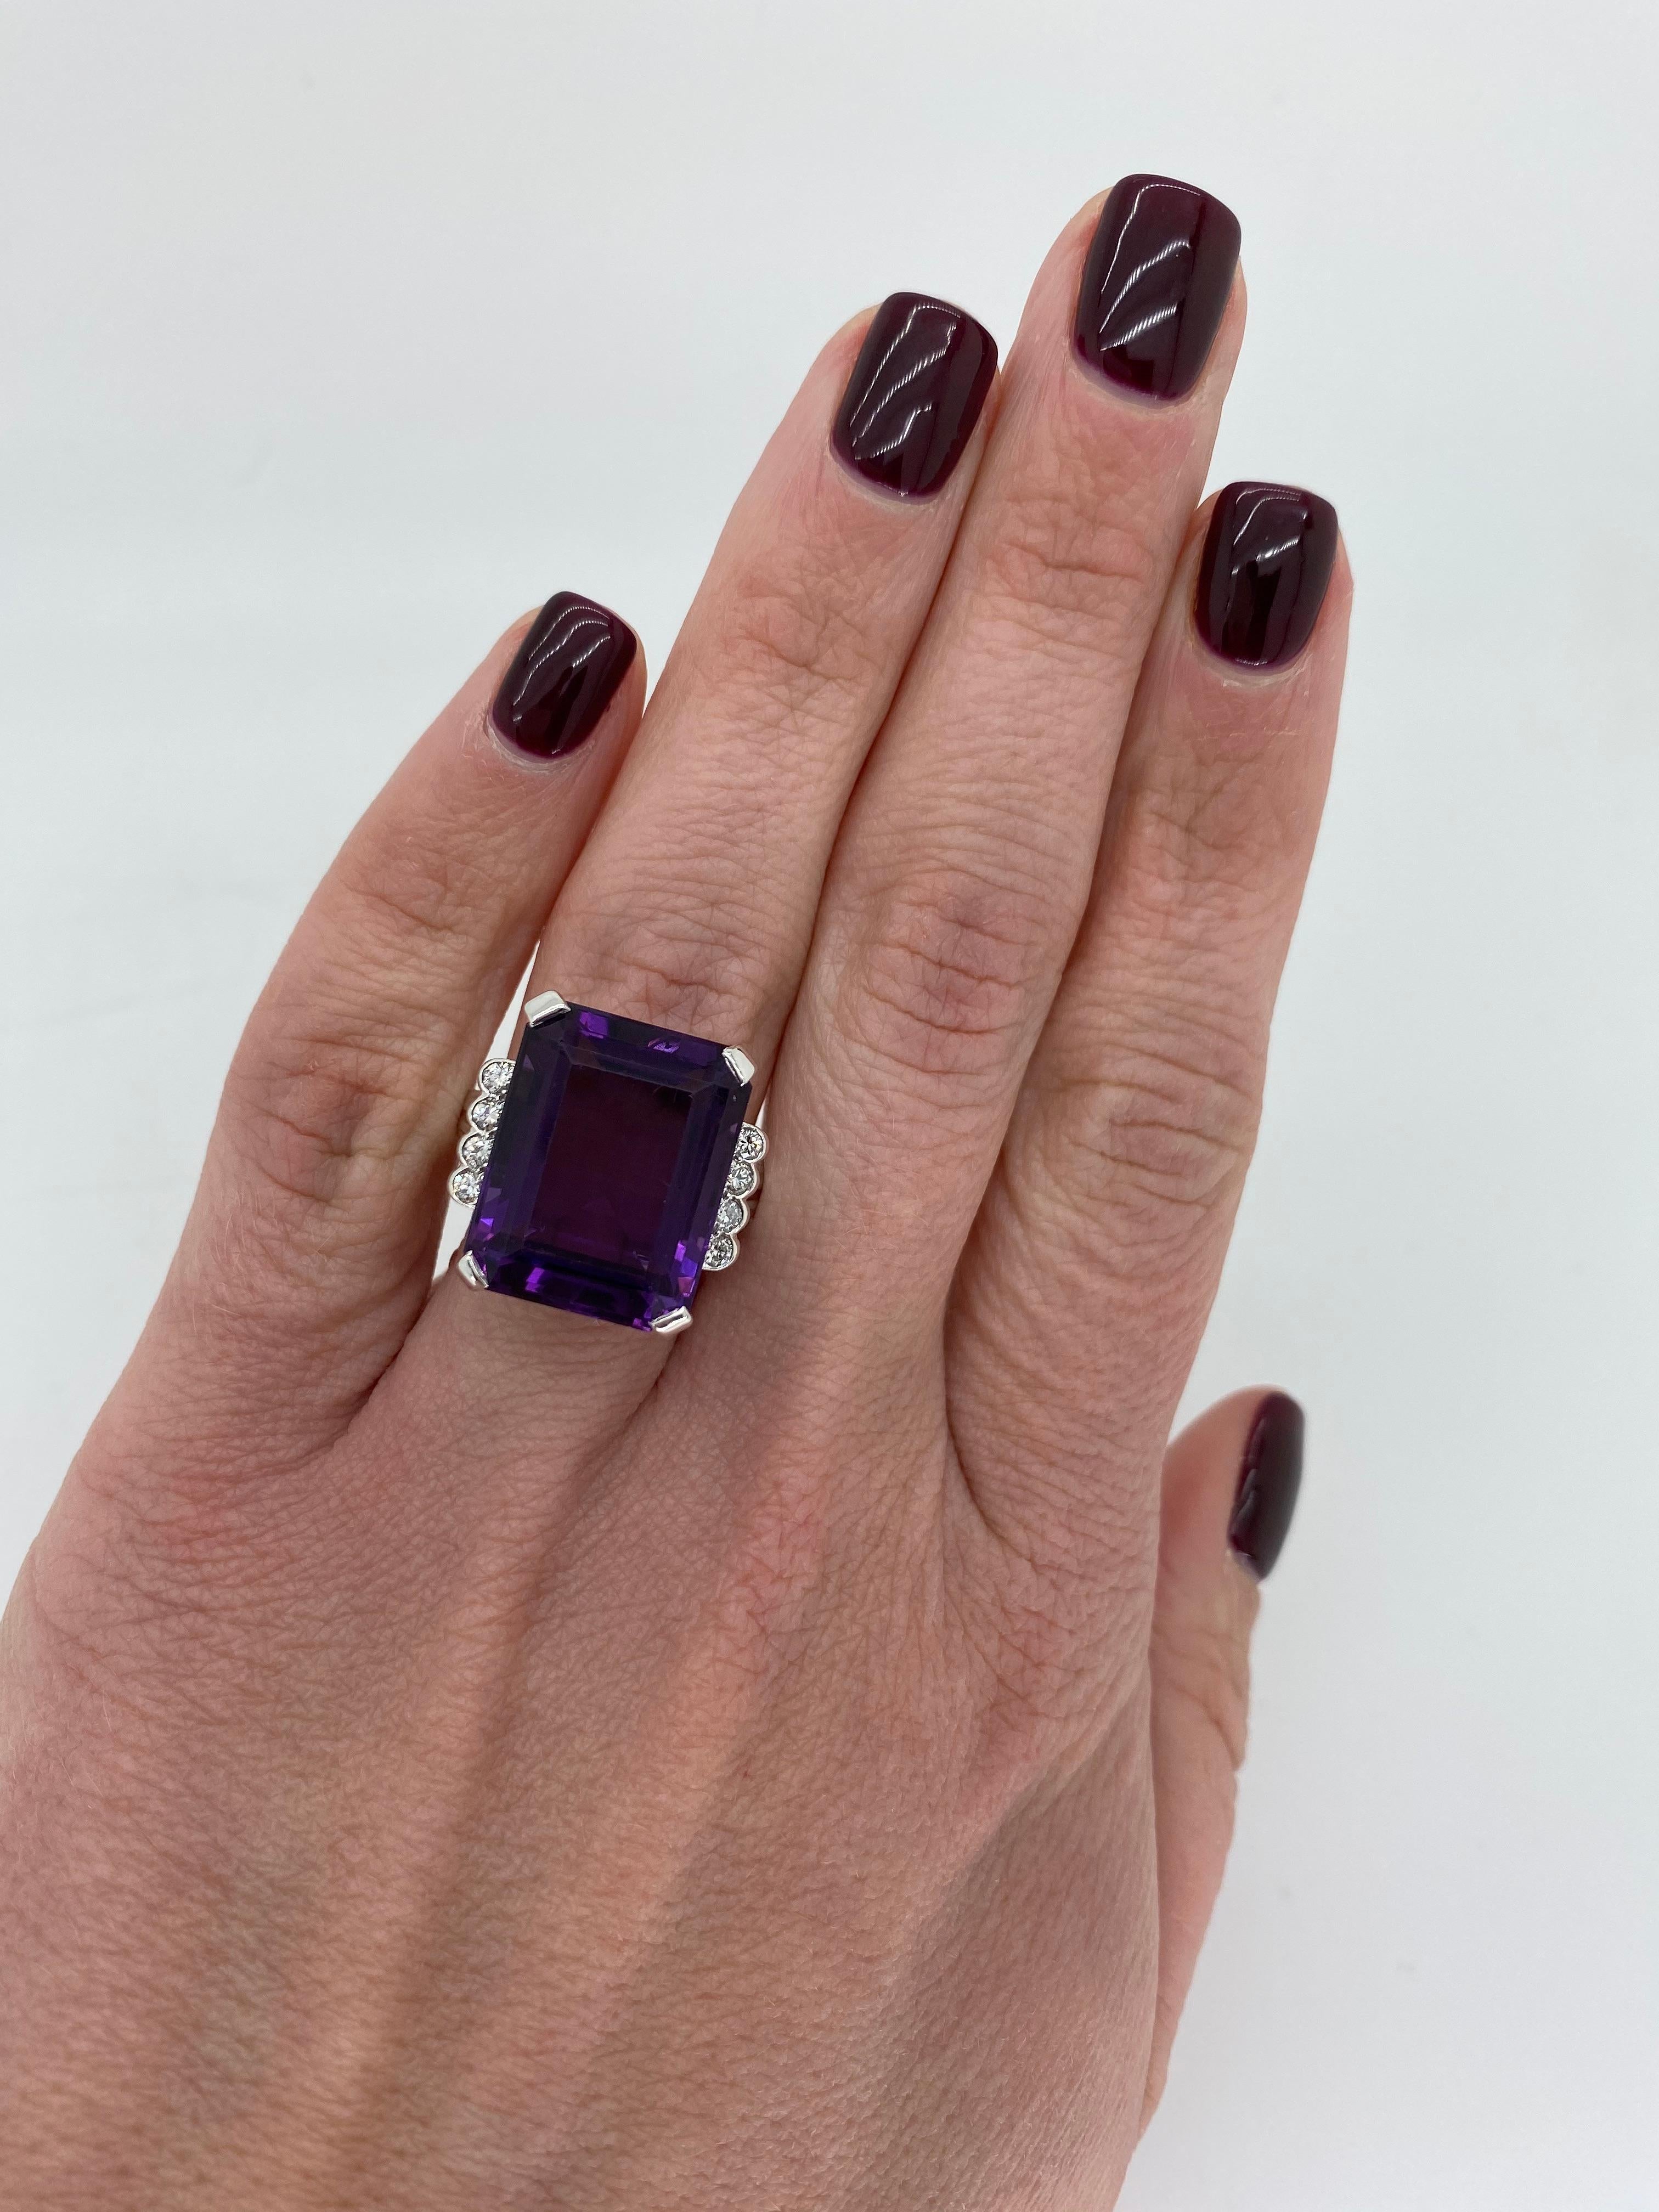 Vintage amethyst and diamond cocktail ring crafted in 14k white gold.

Gemstone: Amethyst and Diamond 
Gemstone Carat Weight: Approximately 17.7x13.8 mm 
Diamond Carat Weight:  Approximately .21CTW
Diamond Cut: Round Brilliant Cut
Color: Average